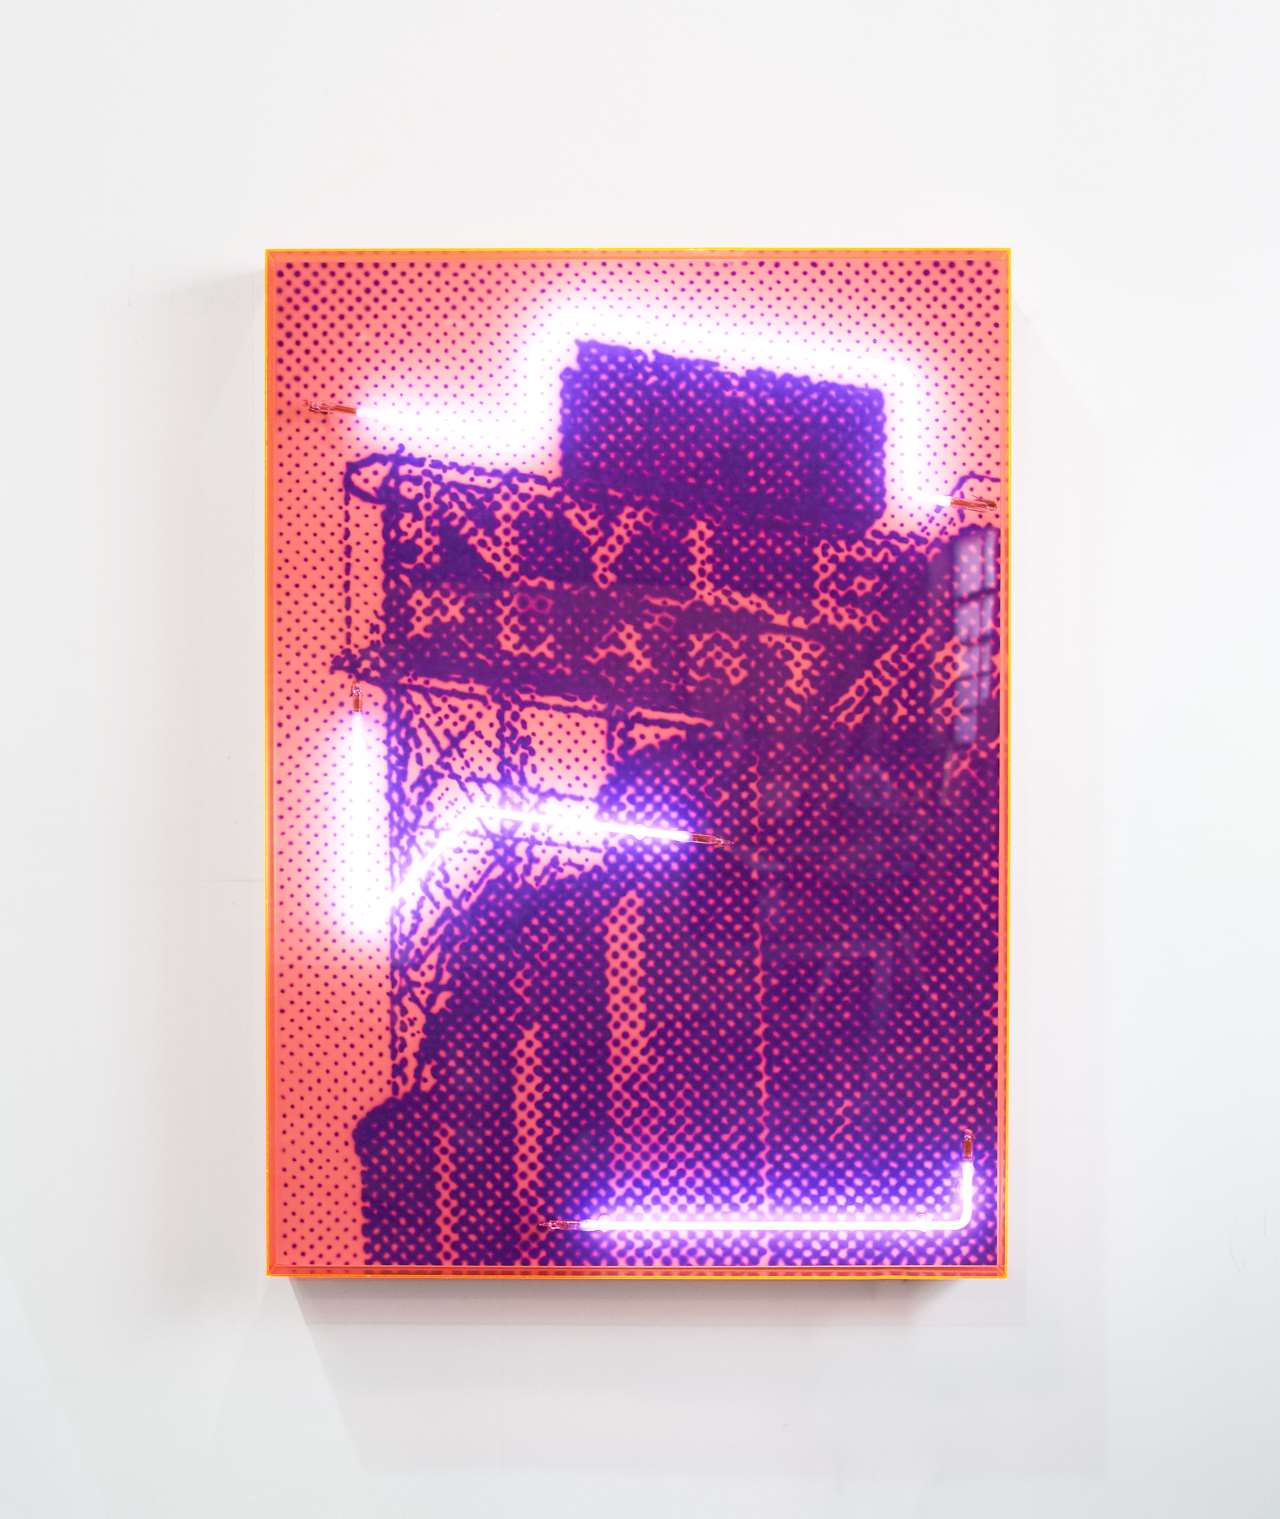 Tom Adair, An industrial past with heritage architecture, Airbrush acrylic polymer and neon on dibond, pink acrylic frame, 90x125cm. © Tom Adair.